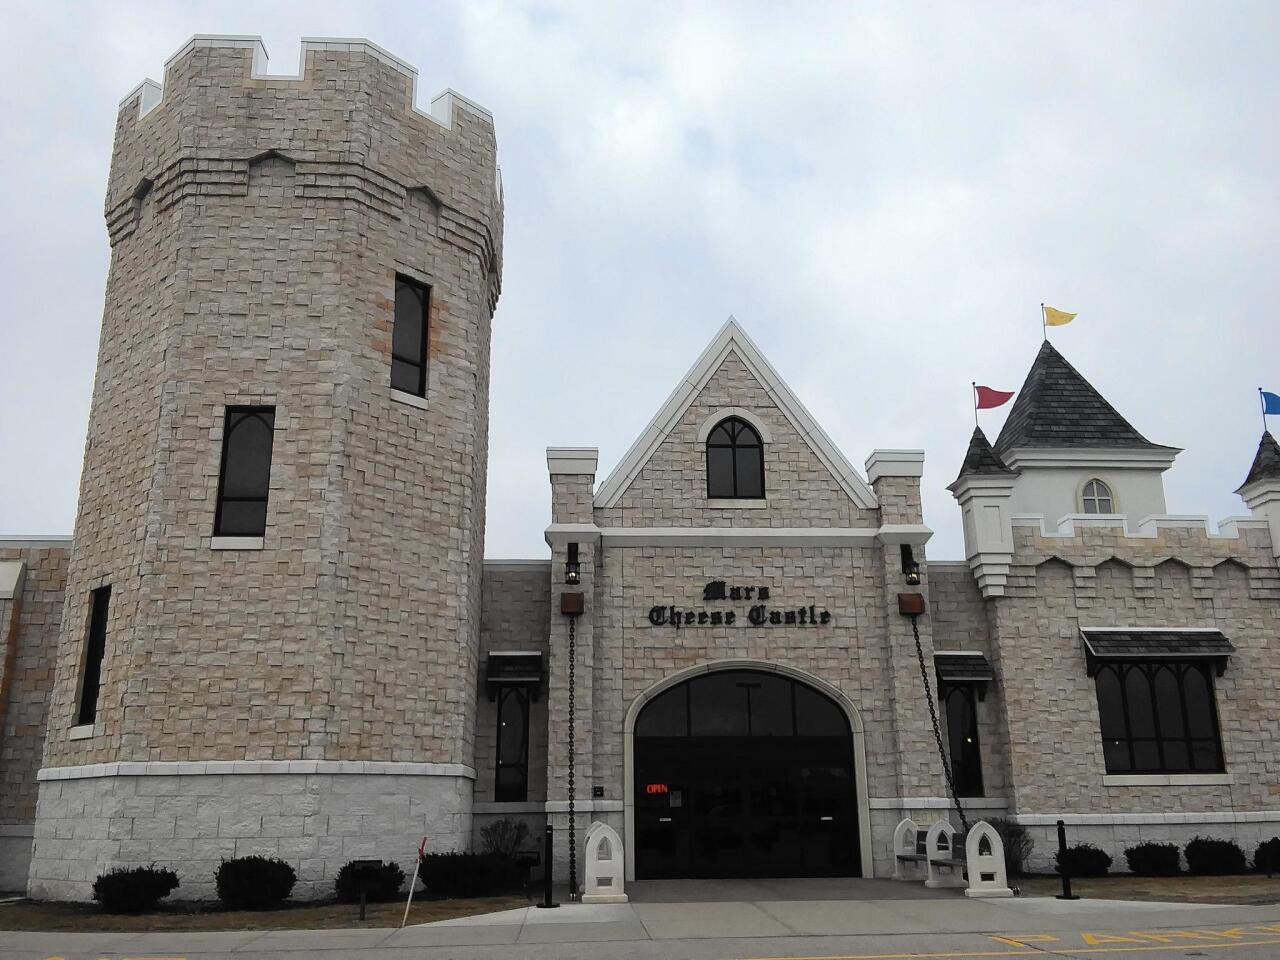 Mars Cheese Castle has an enviable location off I-94, at 2800 W. Frontage Road in Kenosha, Wis.